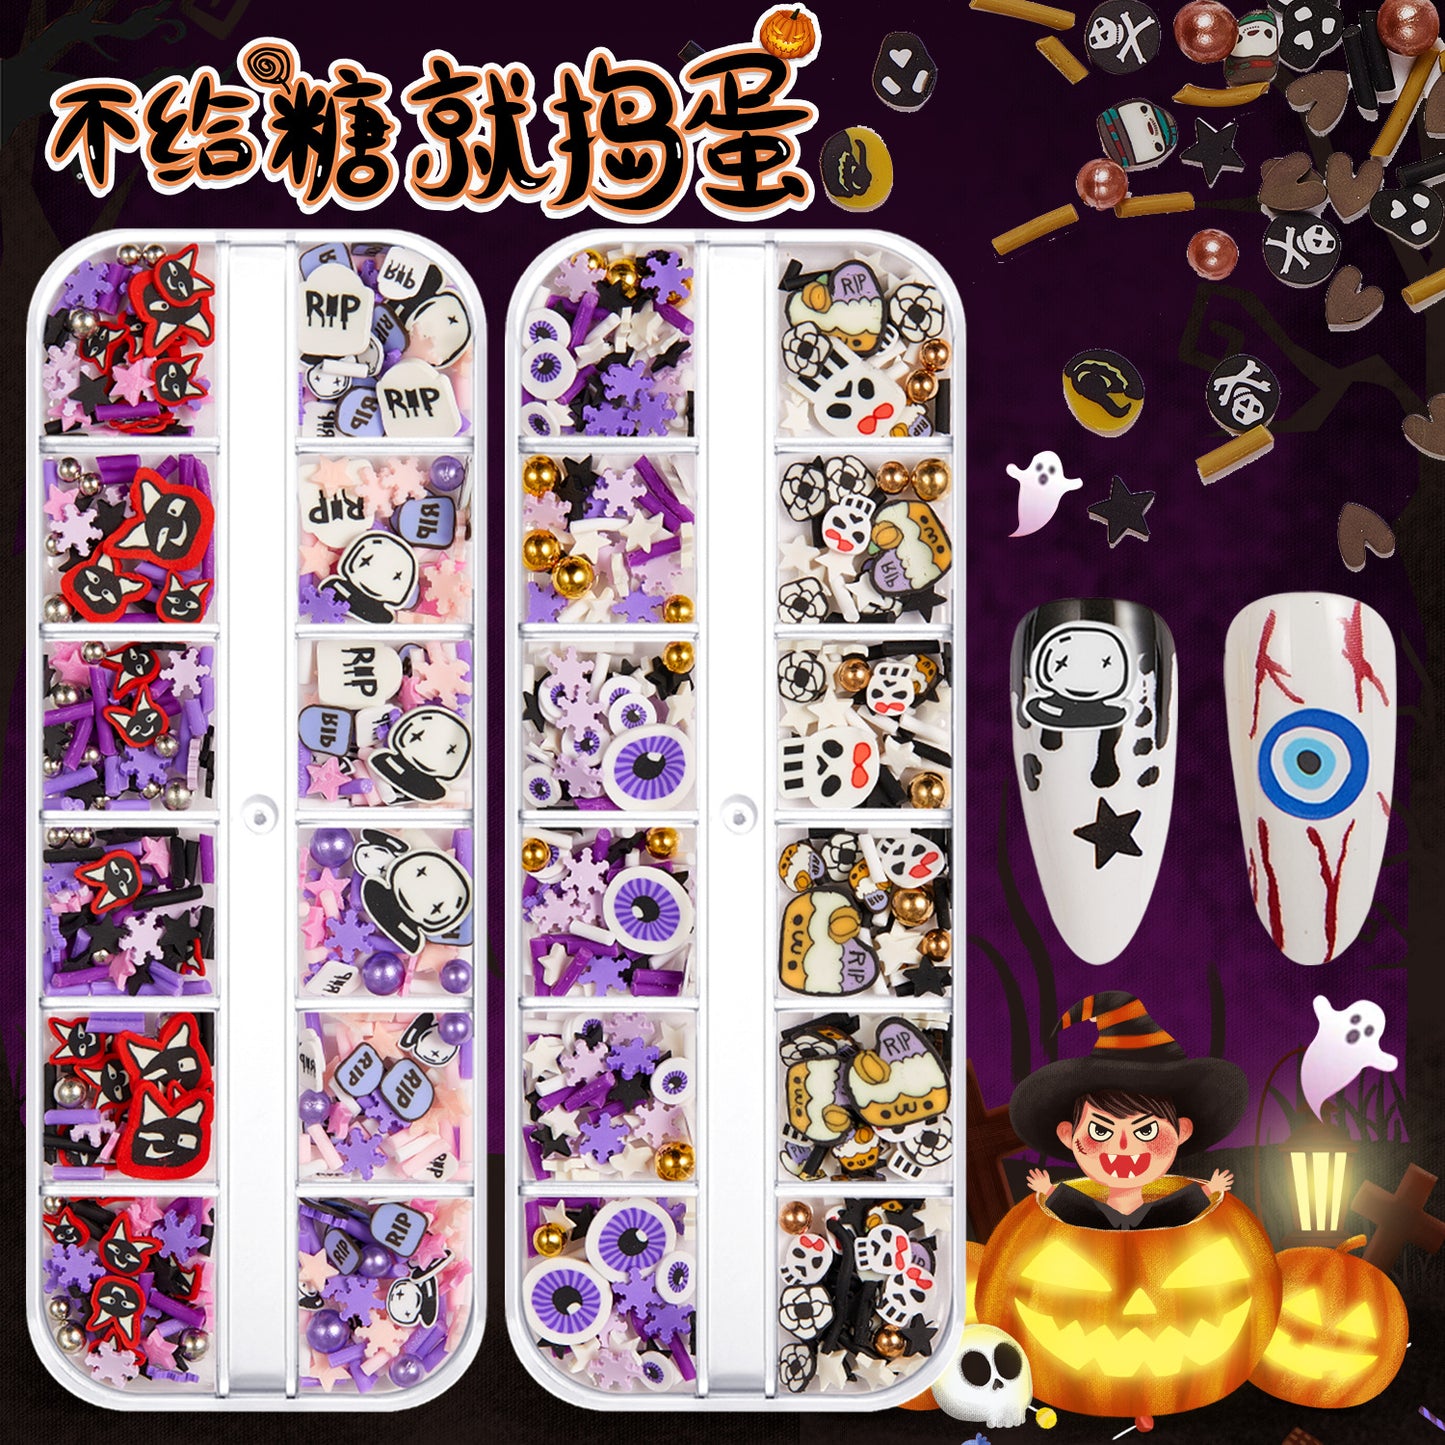 【Halloween Slices Series】Skull Spider Pumpkin Bat Ghost Witch Shape Polymer Clay Slices for Acrylic Nails Design Halloween Party Decor